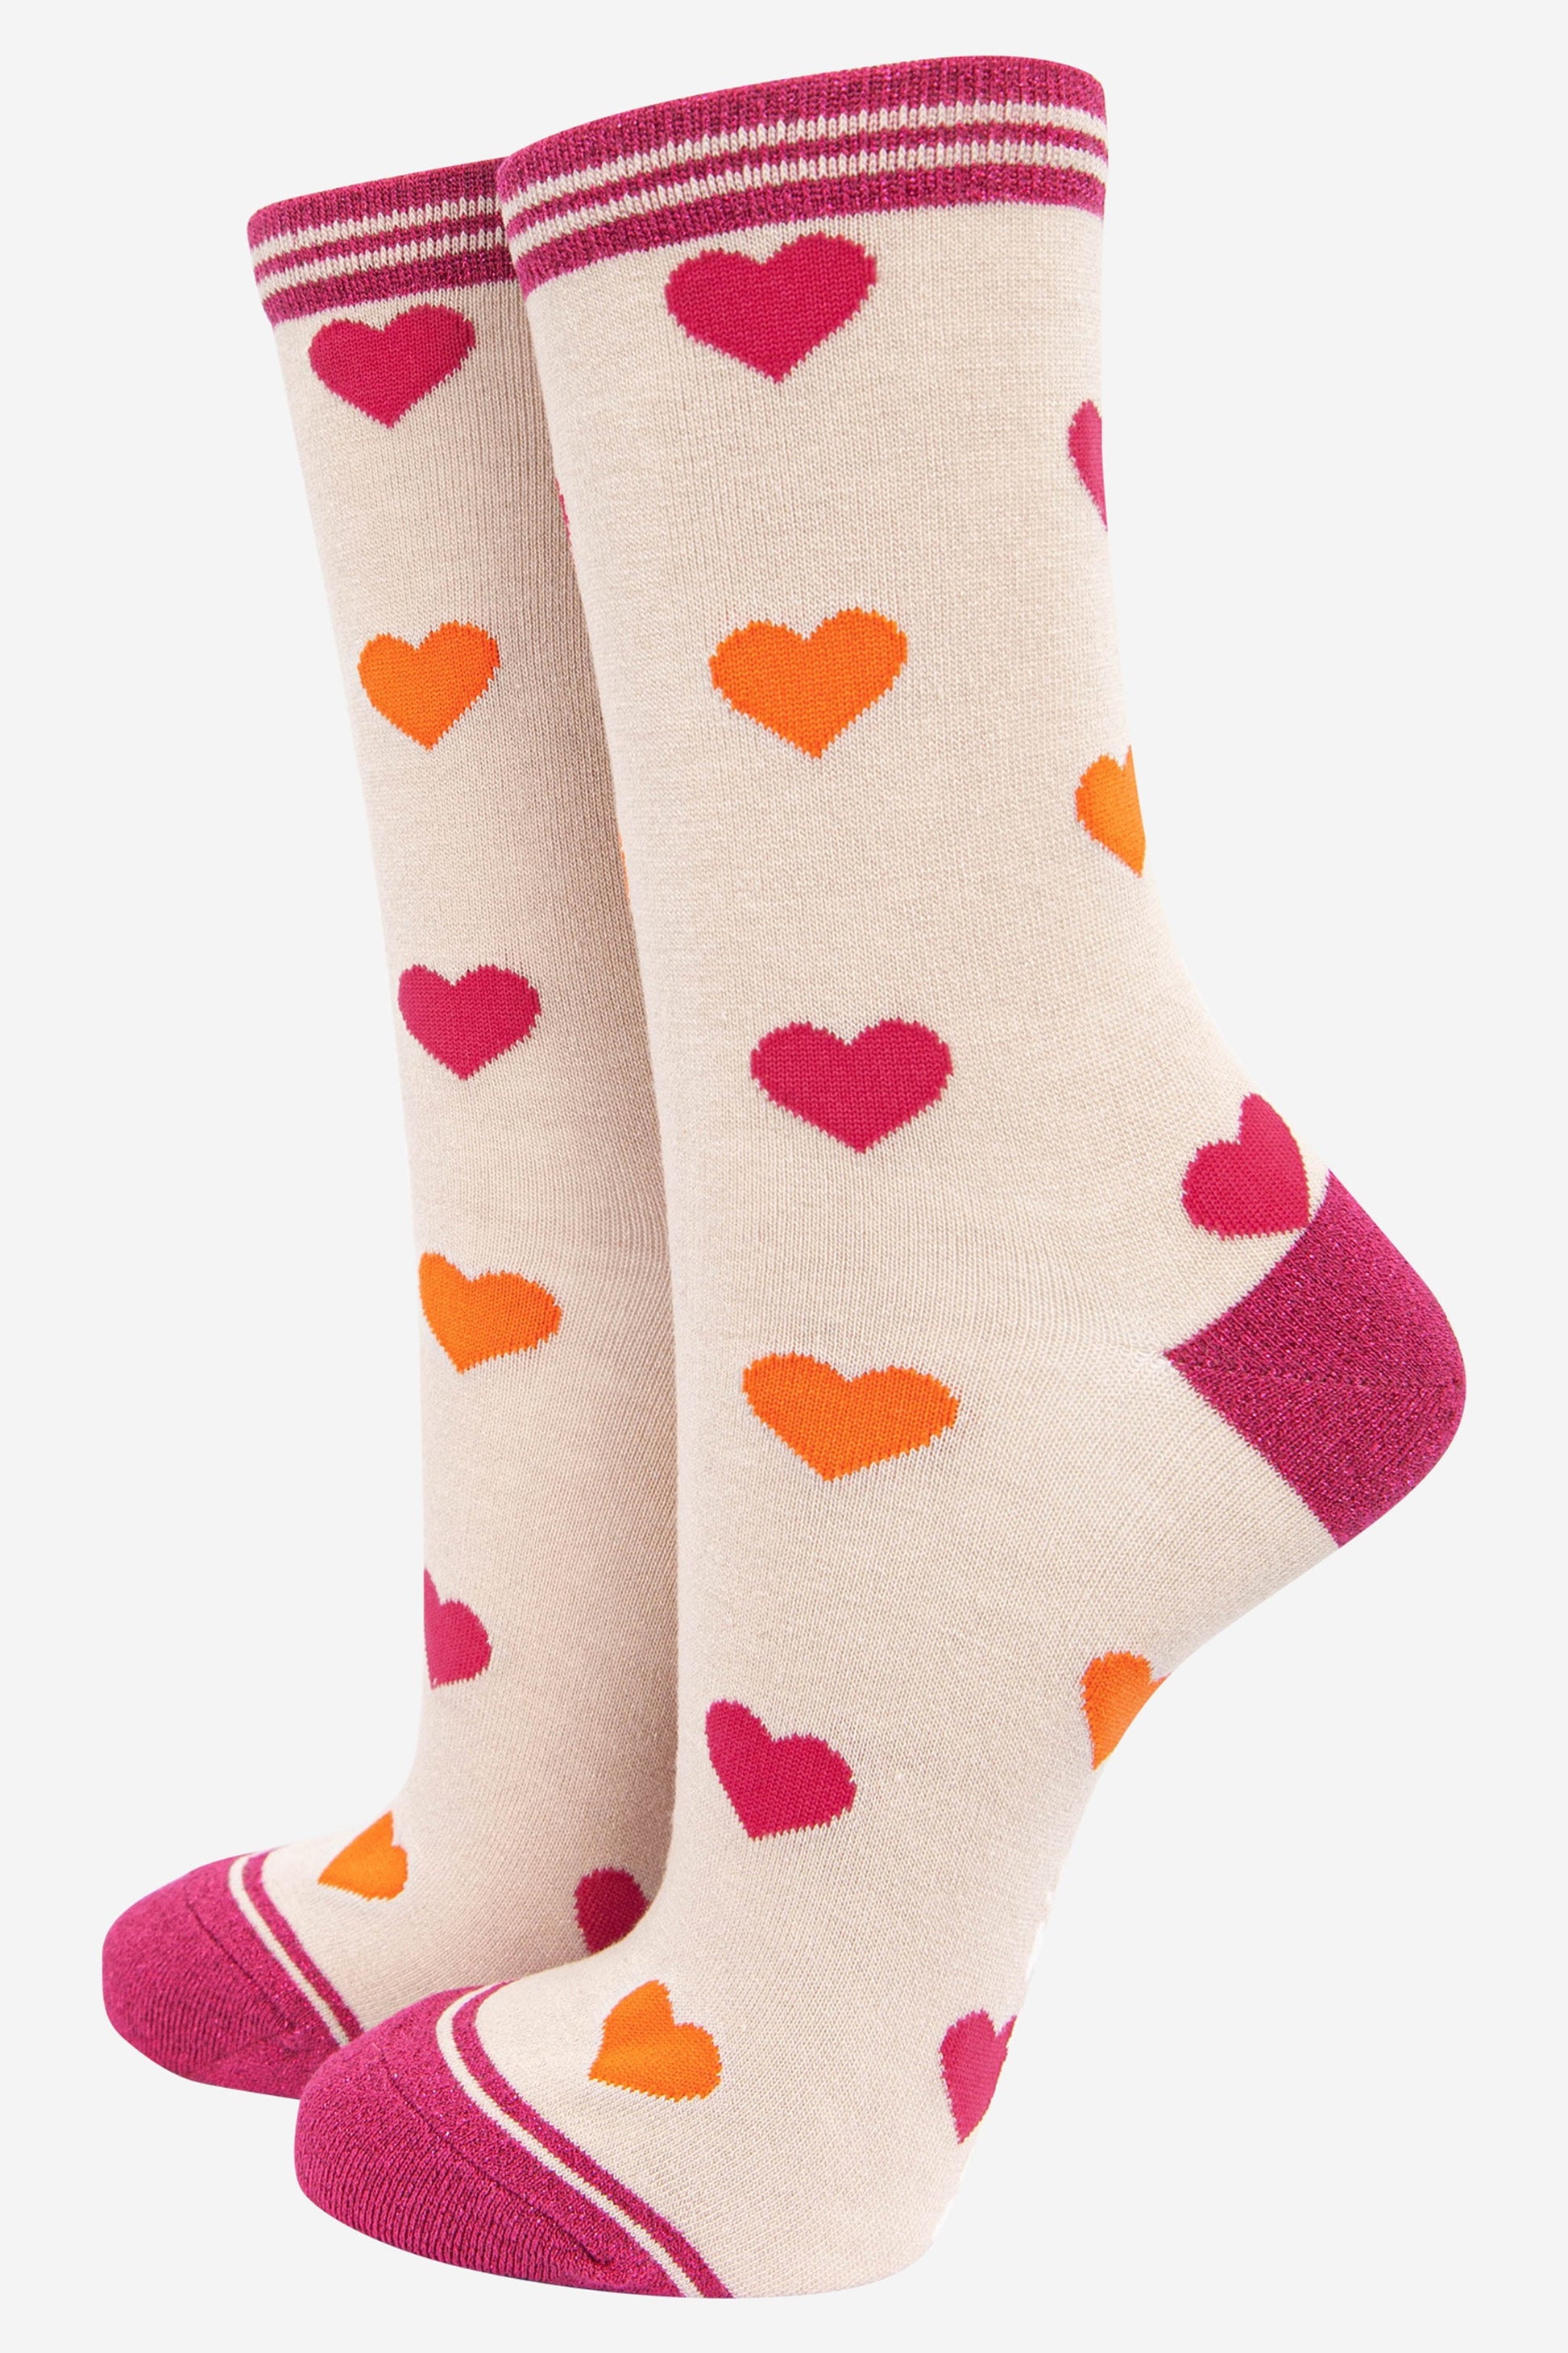 cream ankle socks with an all over pattern of pink and orange love hearts with a pink glitter toe, heel and cuff